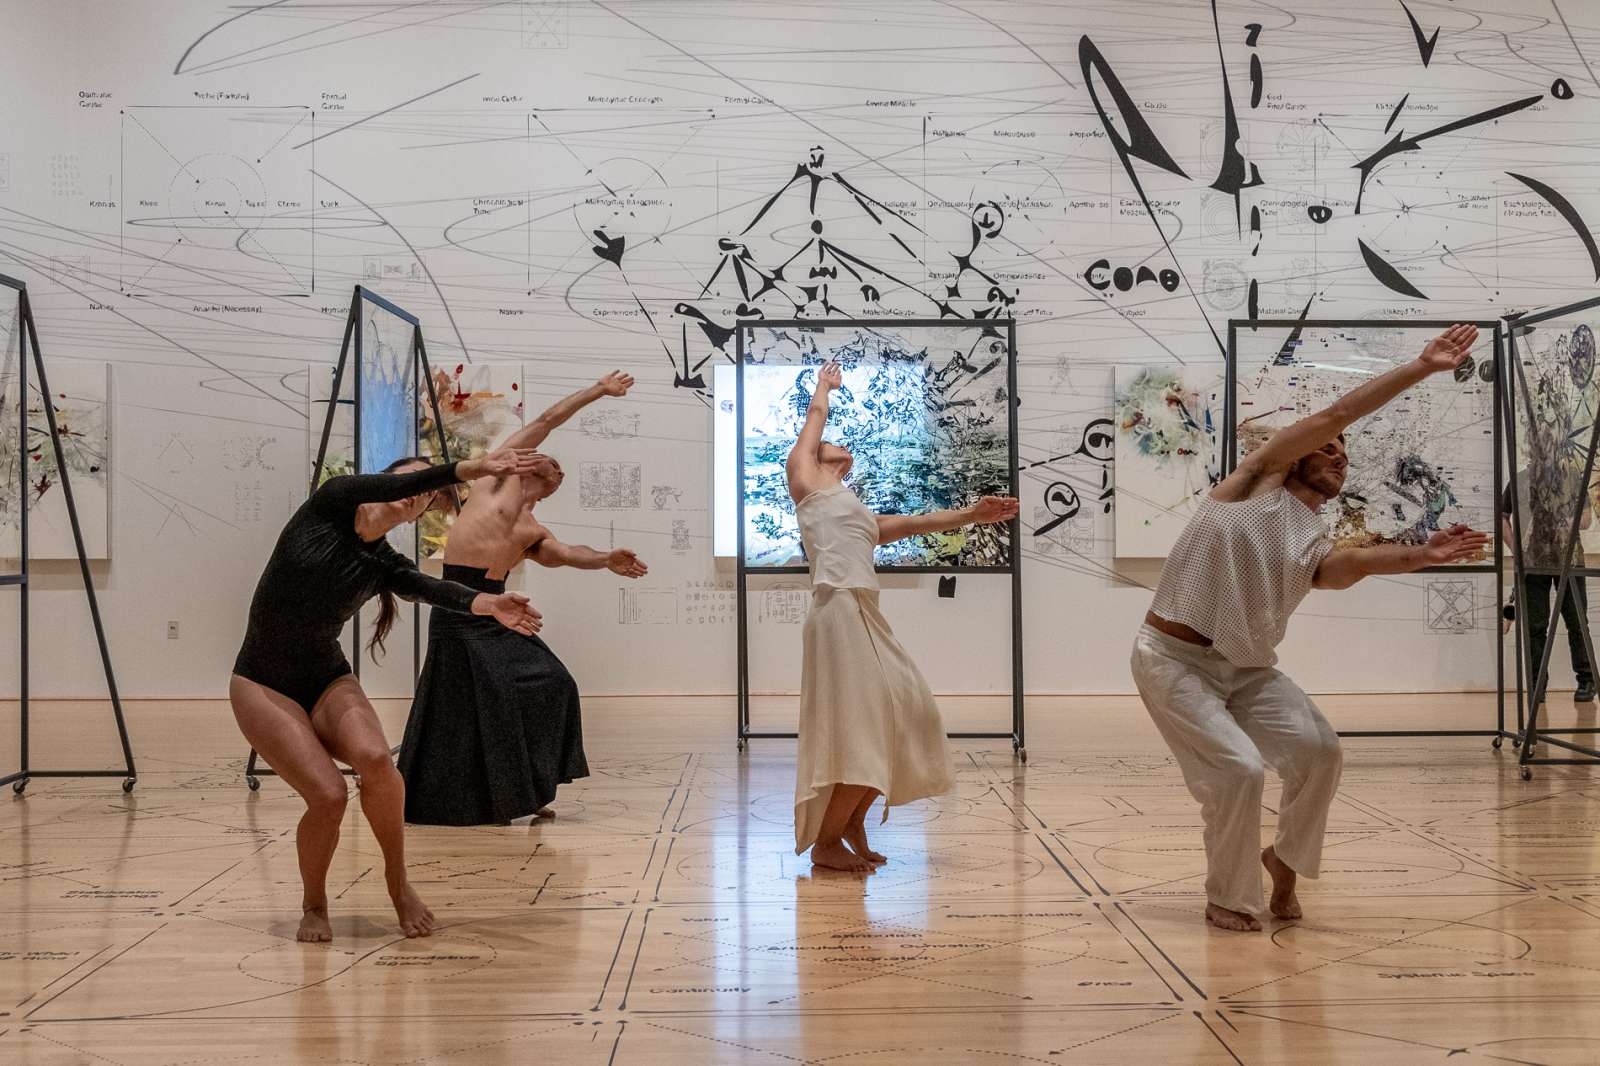 Dimensions Variable at the Moody Center for the Arts. Photo by Nash Baker.